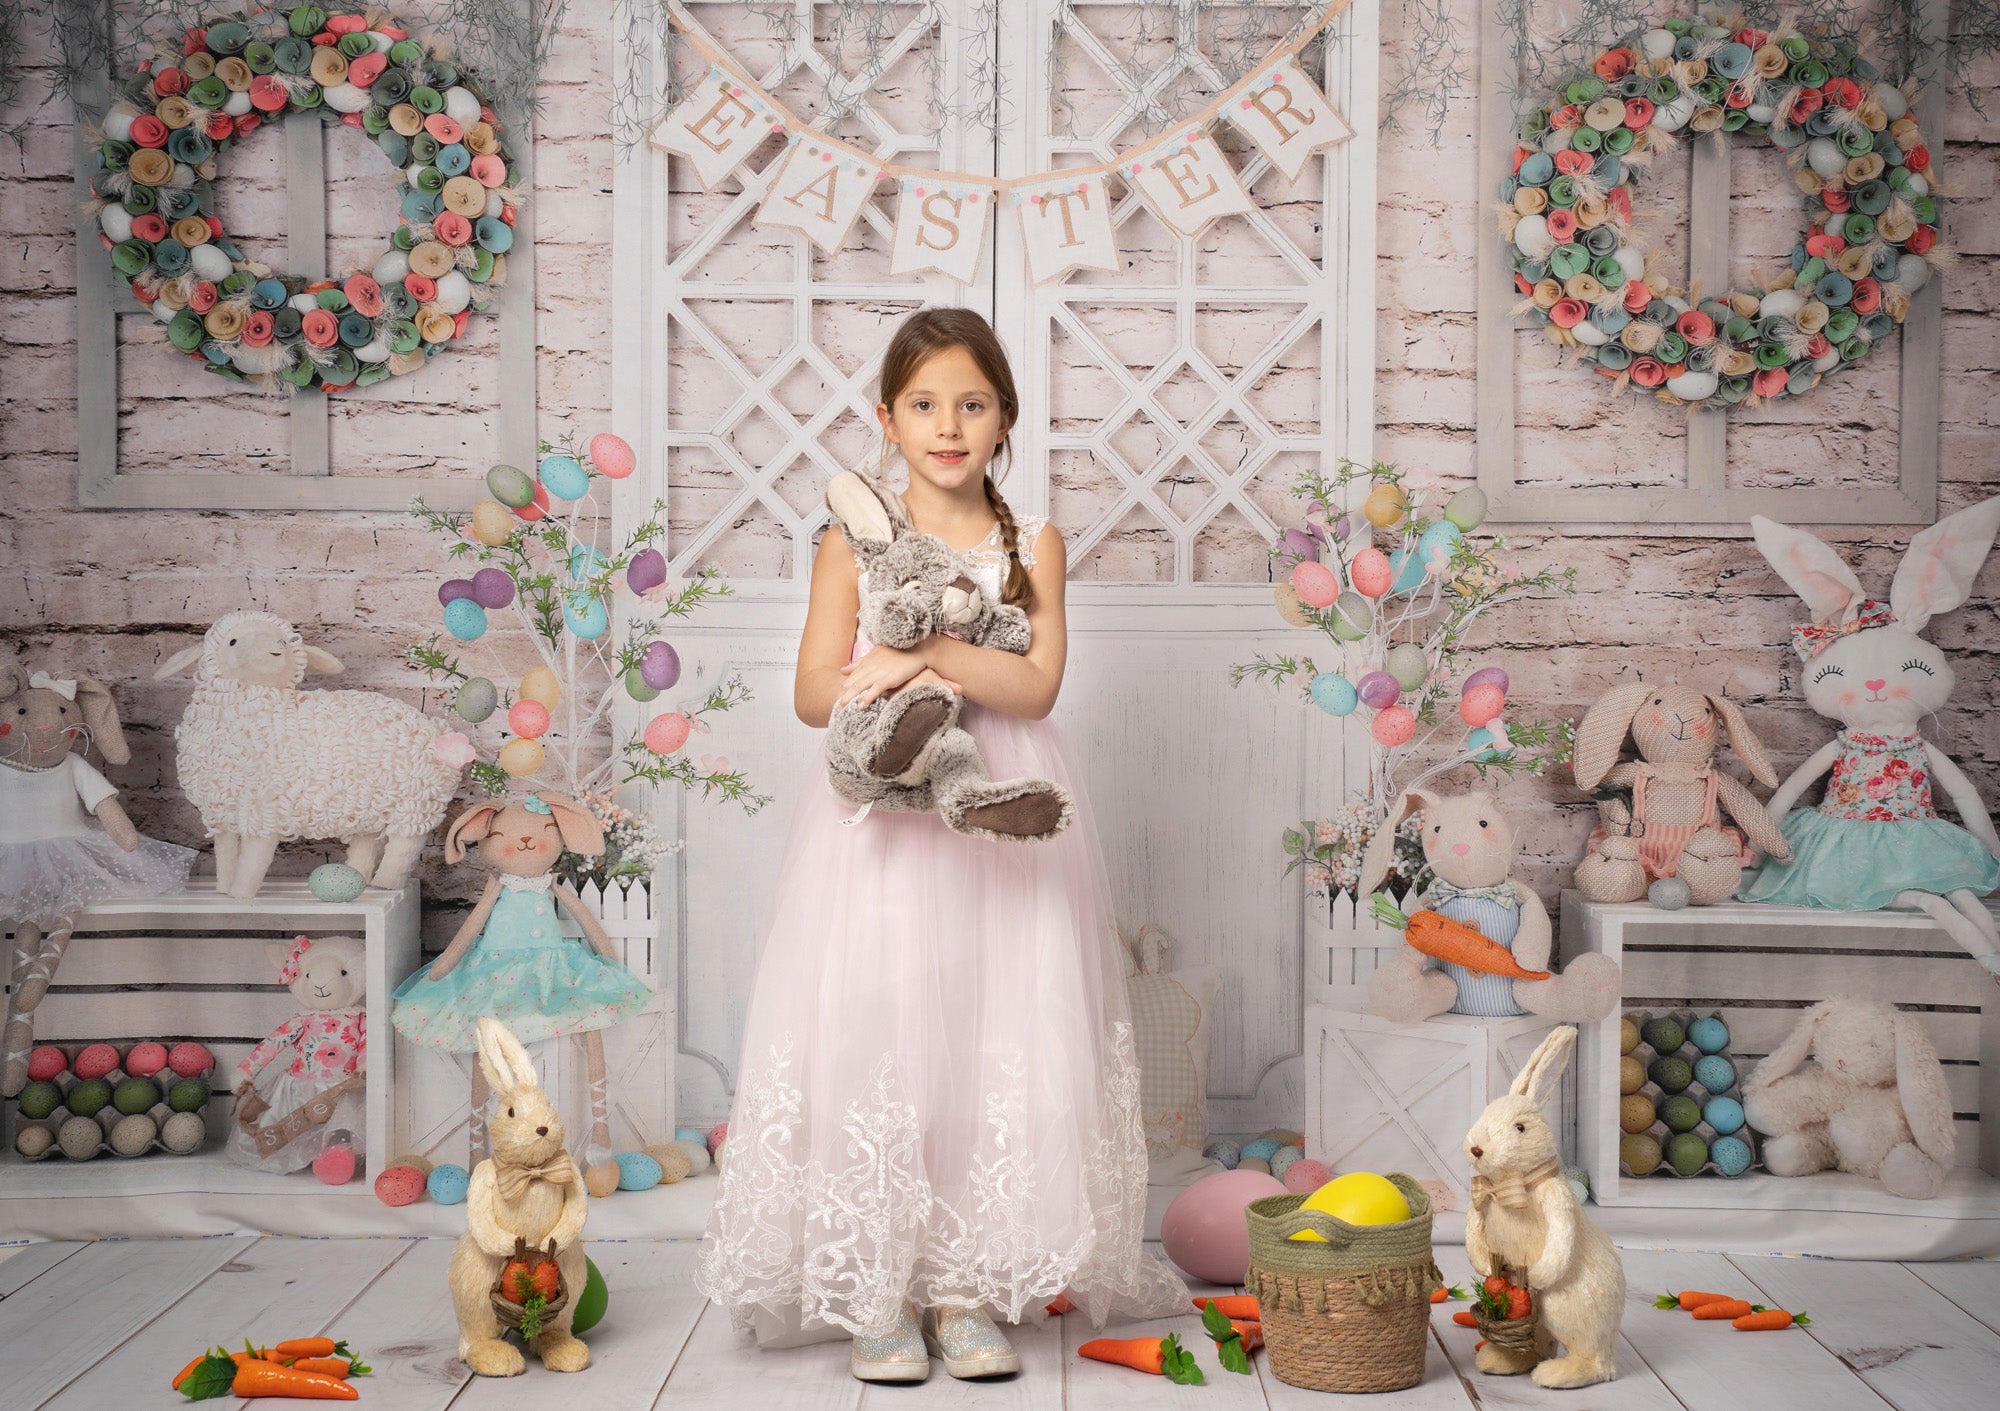 2023 Top 10 Backdrops for Your Easter/Spring Mini Sessions